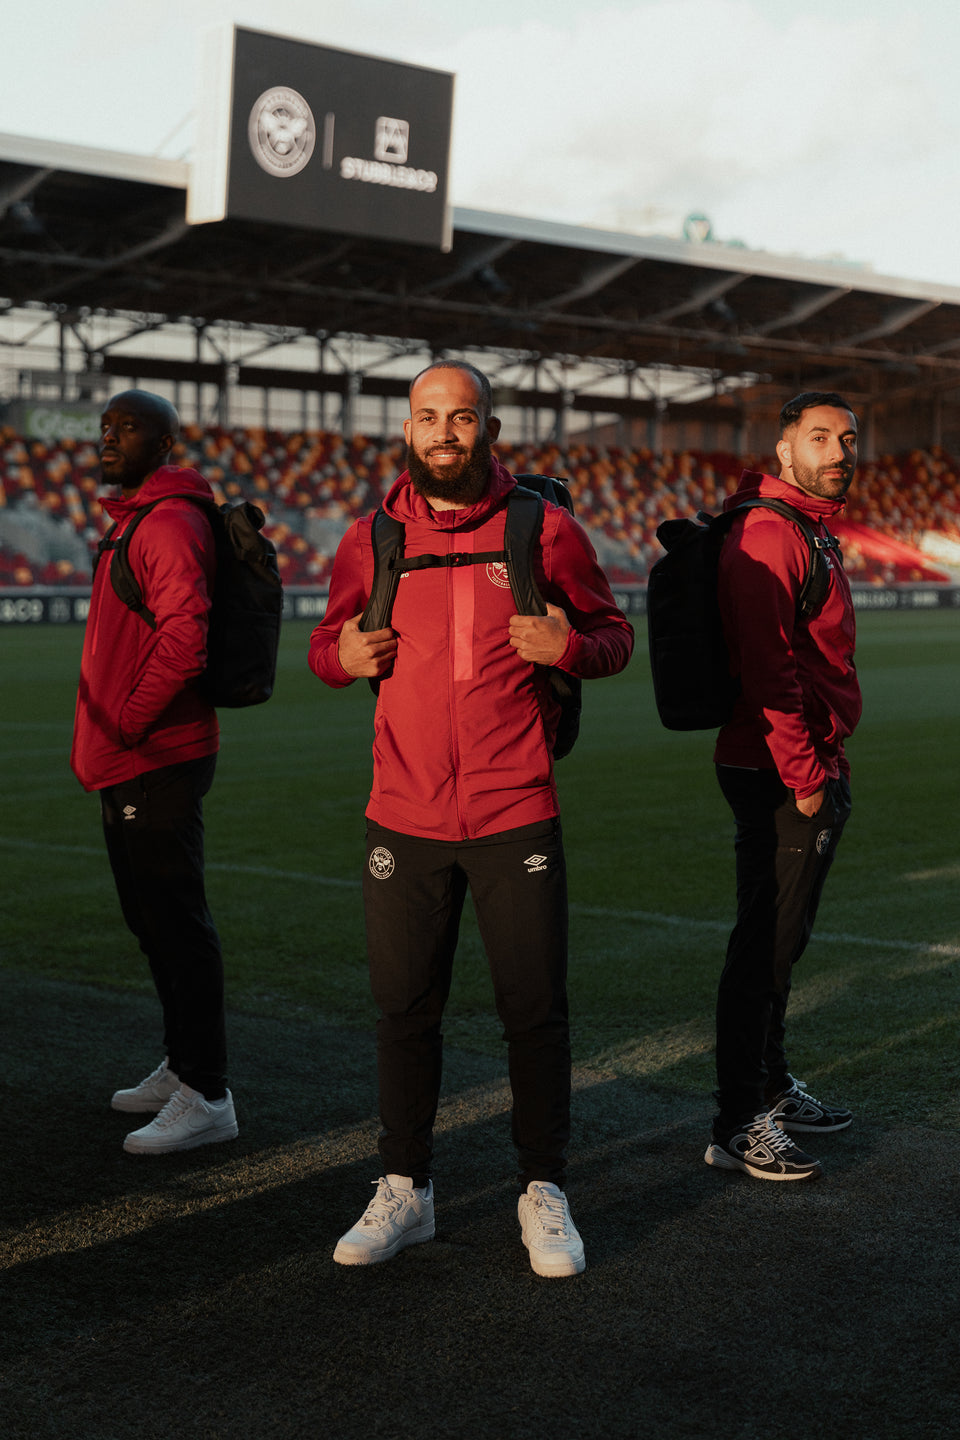 Three Brentford football players standing on the pitch wearing black backpacks and rucksacks